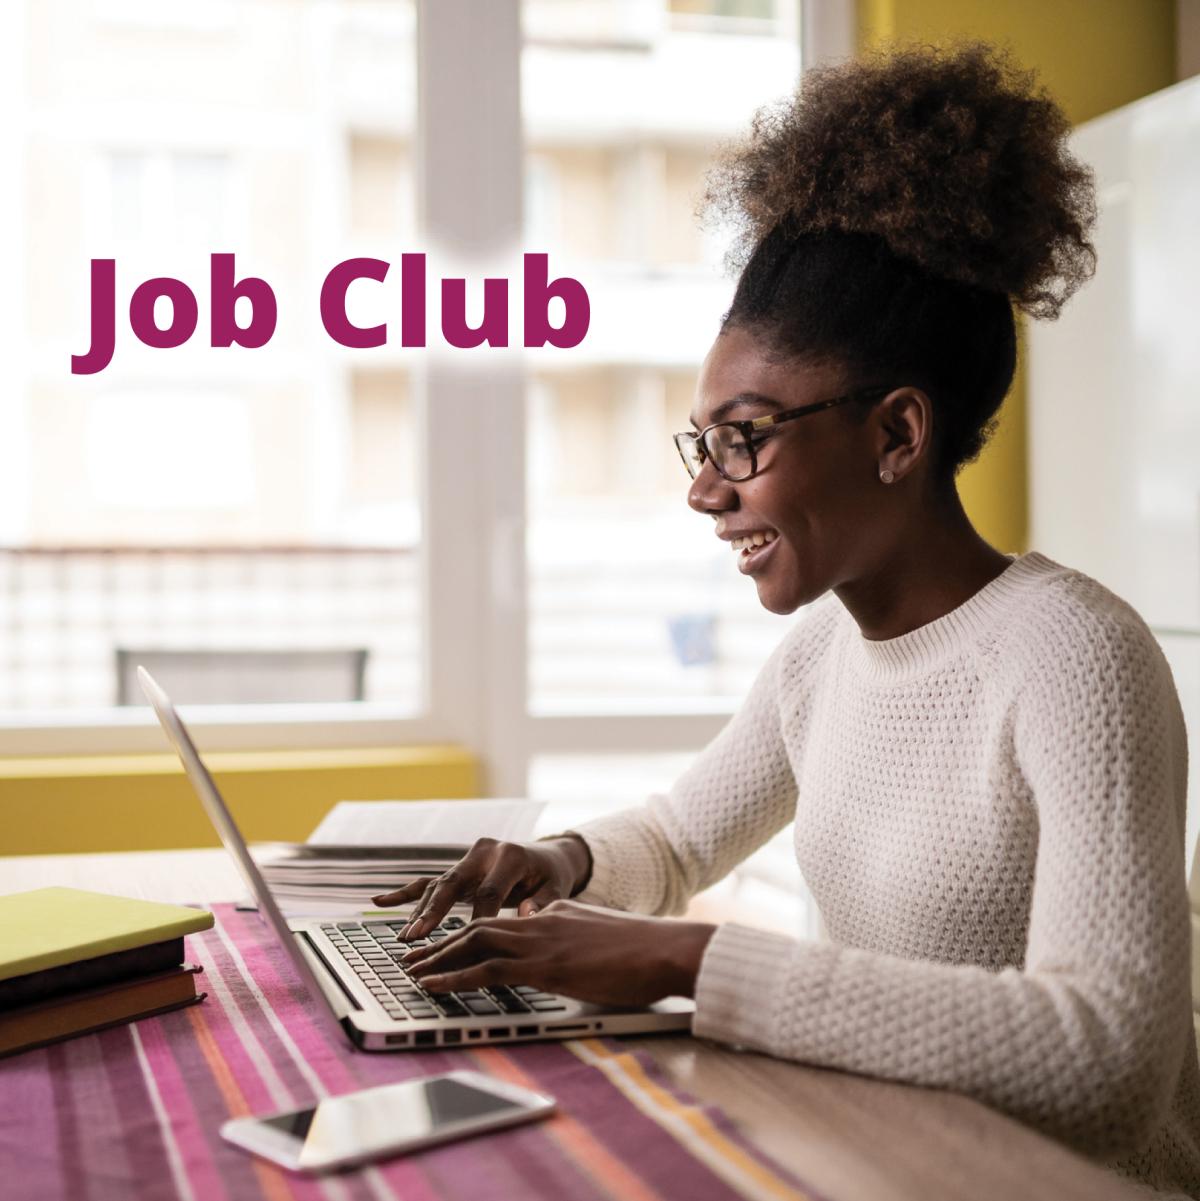 Person sitting at table on computer with "Job Club" text on image